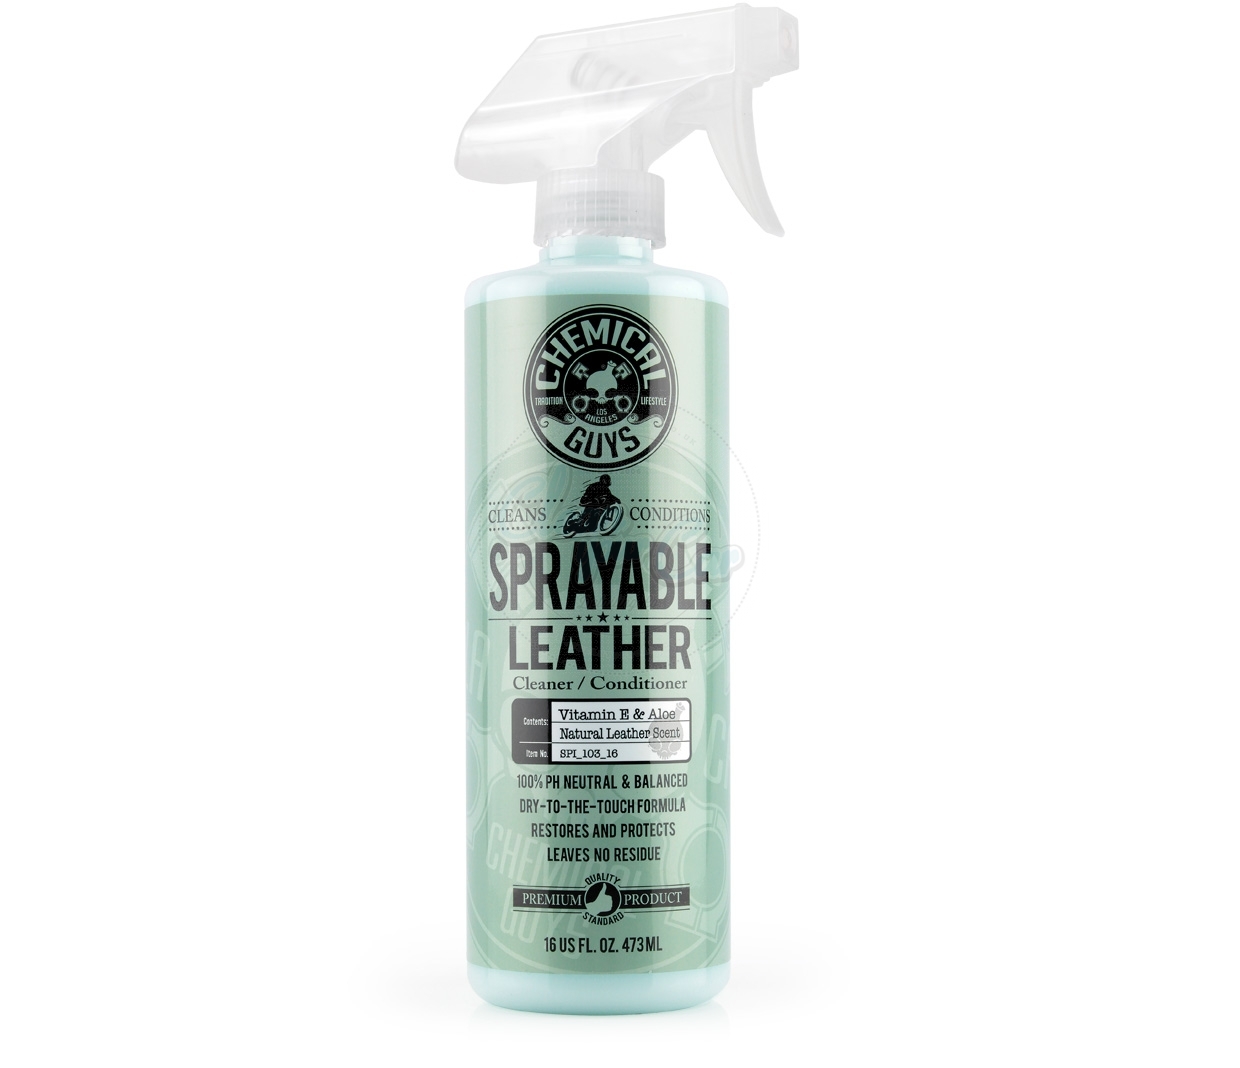 Chemical Guys Sprayable Leather Cleaner And Conditioner 16 oz.